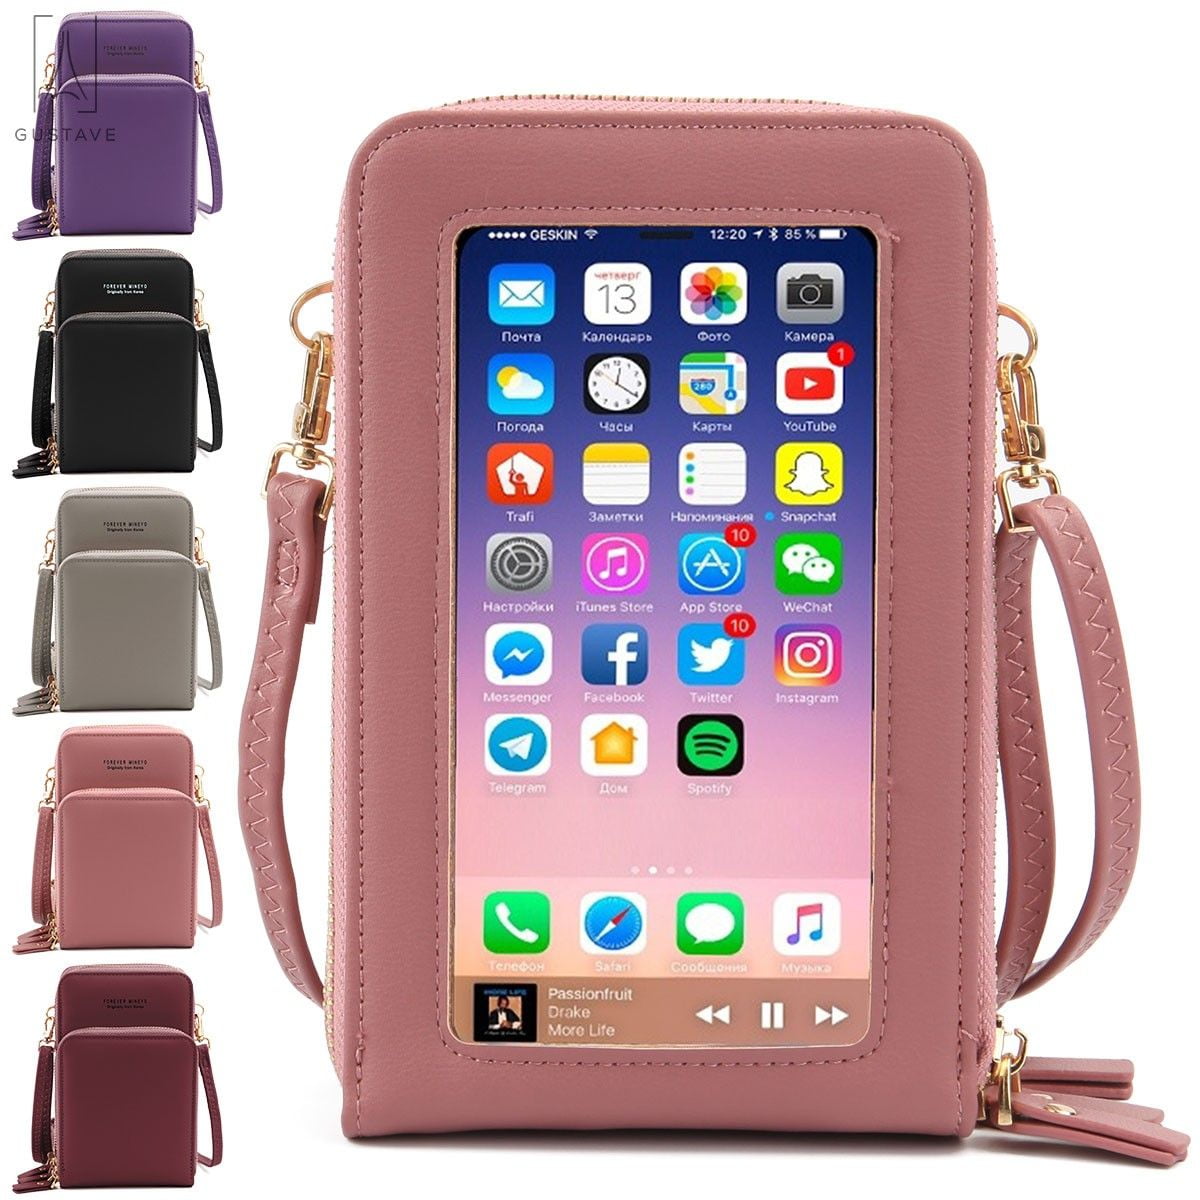 Gustave Touch Screen Cell Phone Purse Wallet Fashion Small PU Leather Card Pockets Crossbody Bag Shoulder Strap Fit iPhone 12 11 XR XS Max 8 Plus 7 P 8ae3d750 6e1c 49c0 a357 e372a0016c9a.b91c34892f46516886b8ed8c84496b77